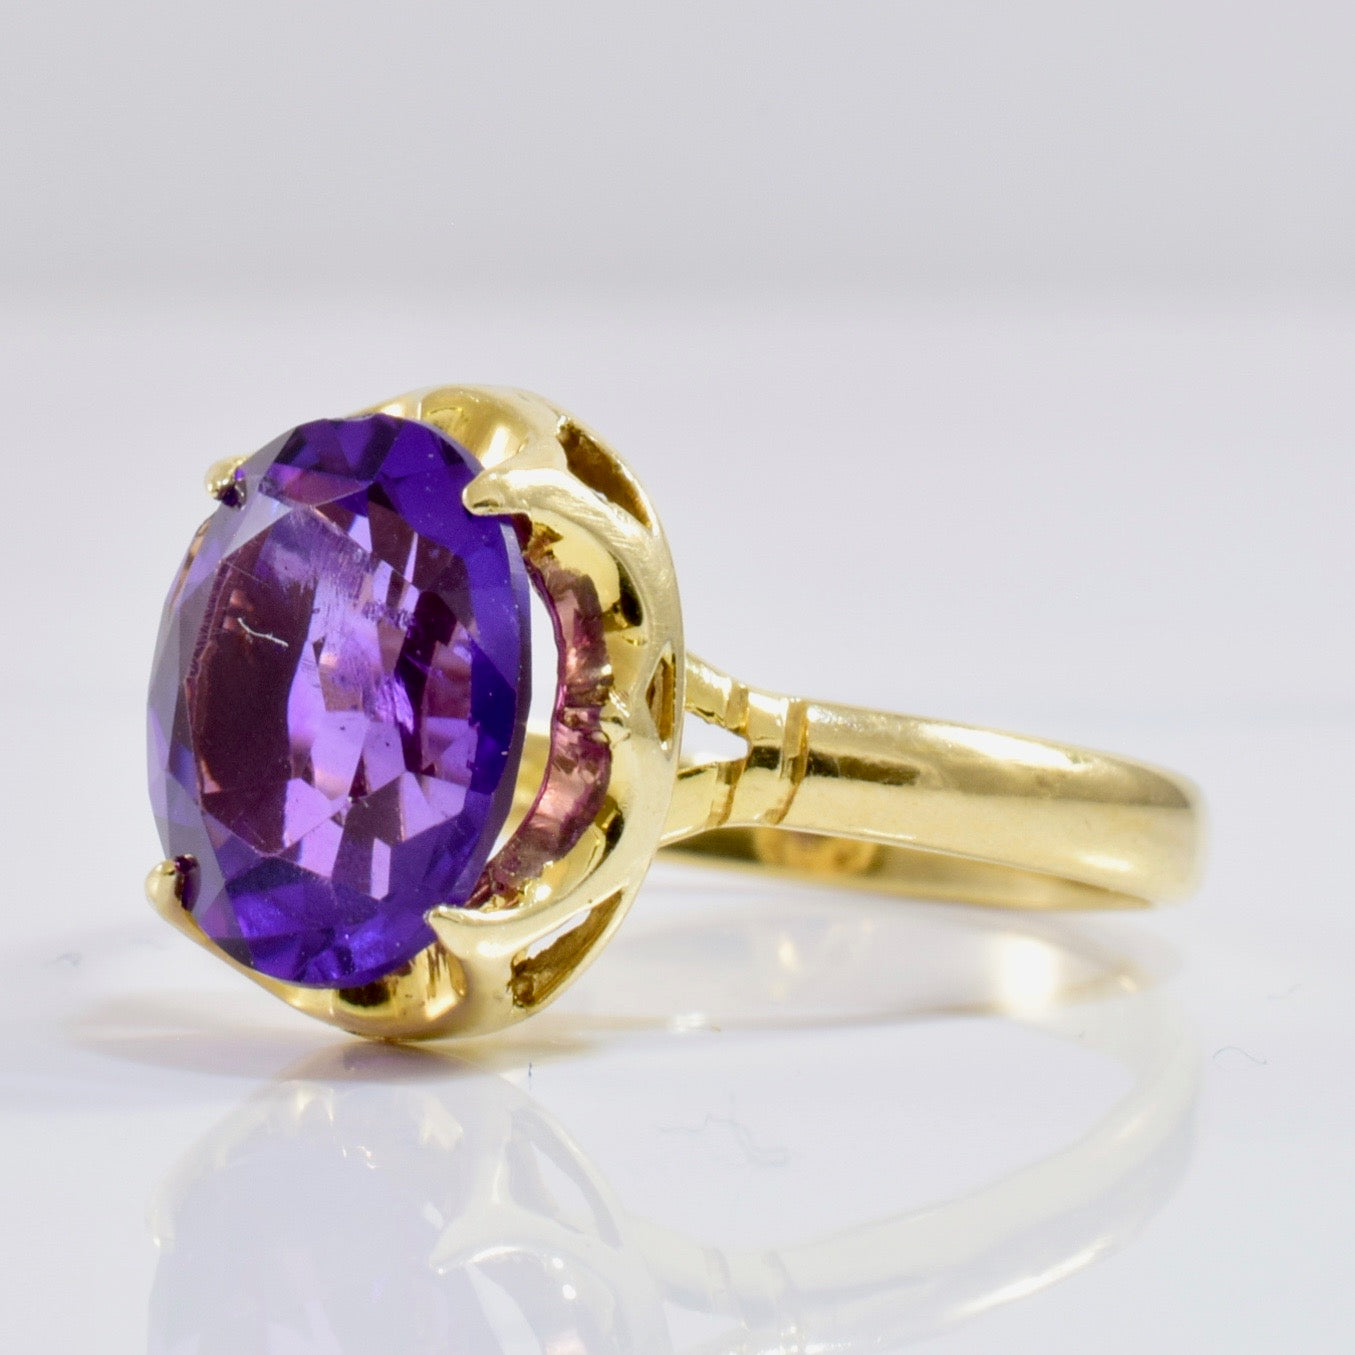 Solitaire Amethyst Ring | SZ 5.75 |